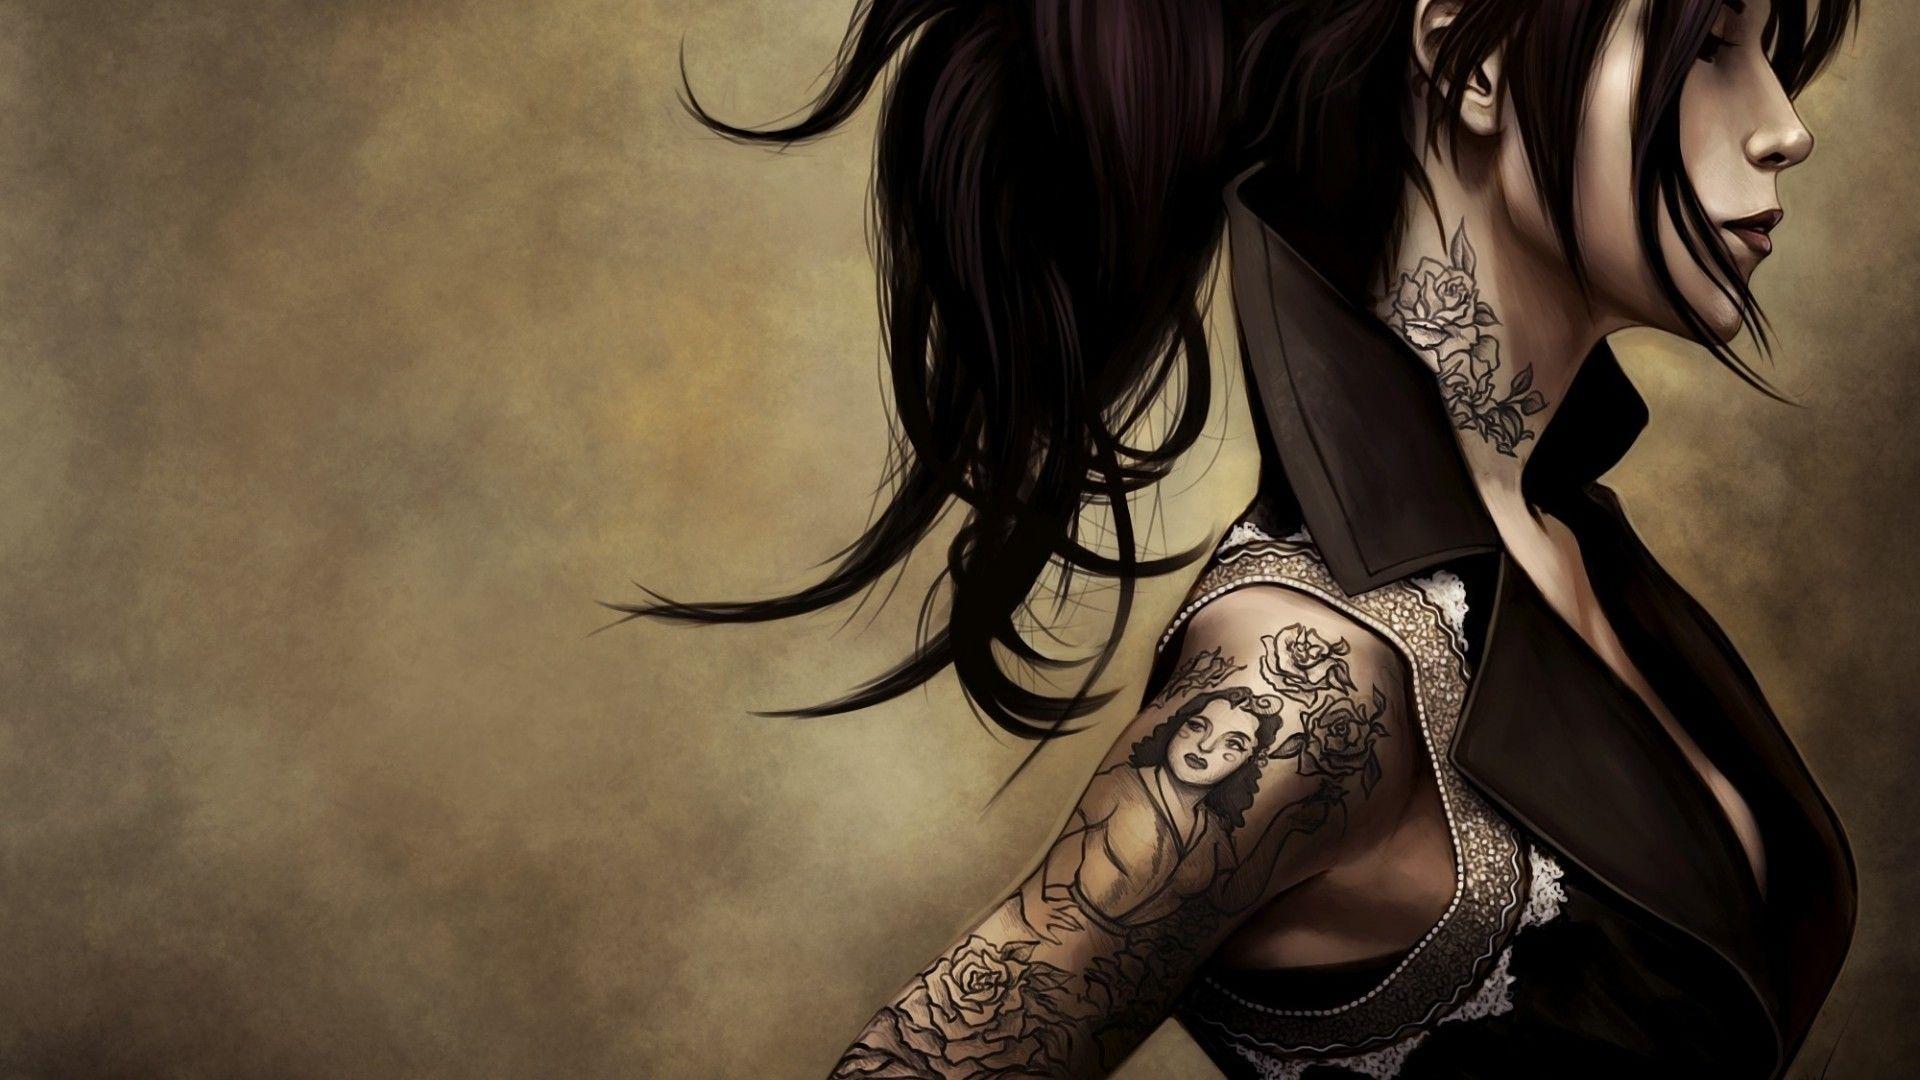 Tattoo Girl Wallpapers Wallpaper Cave 